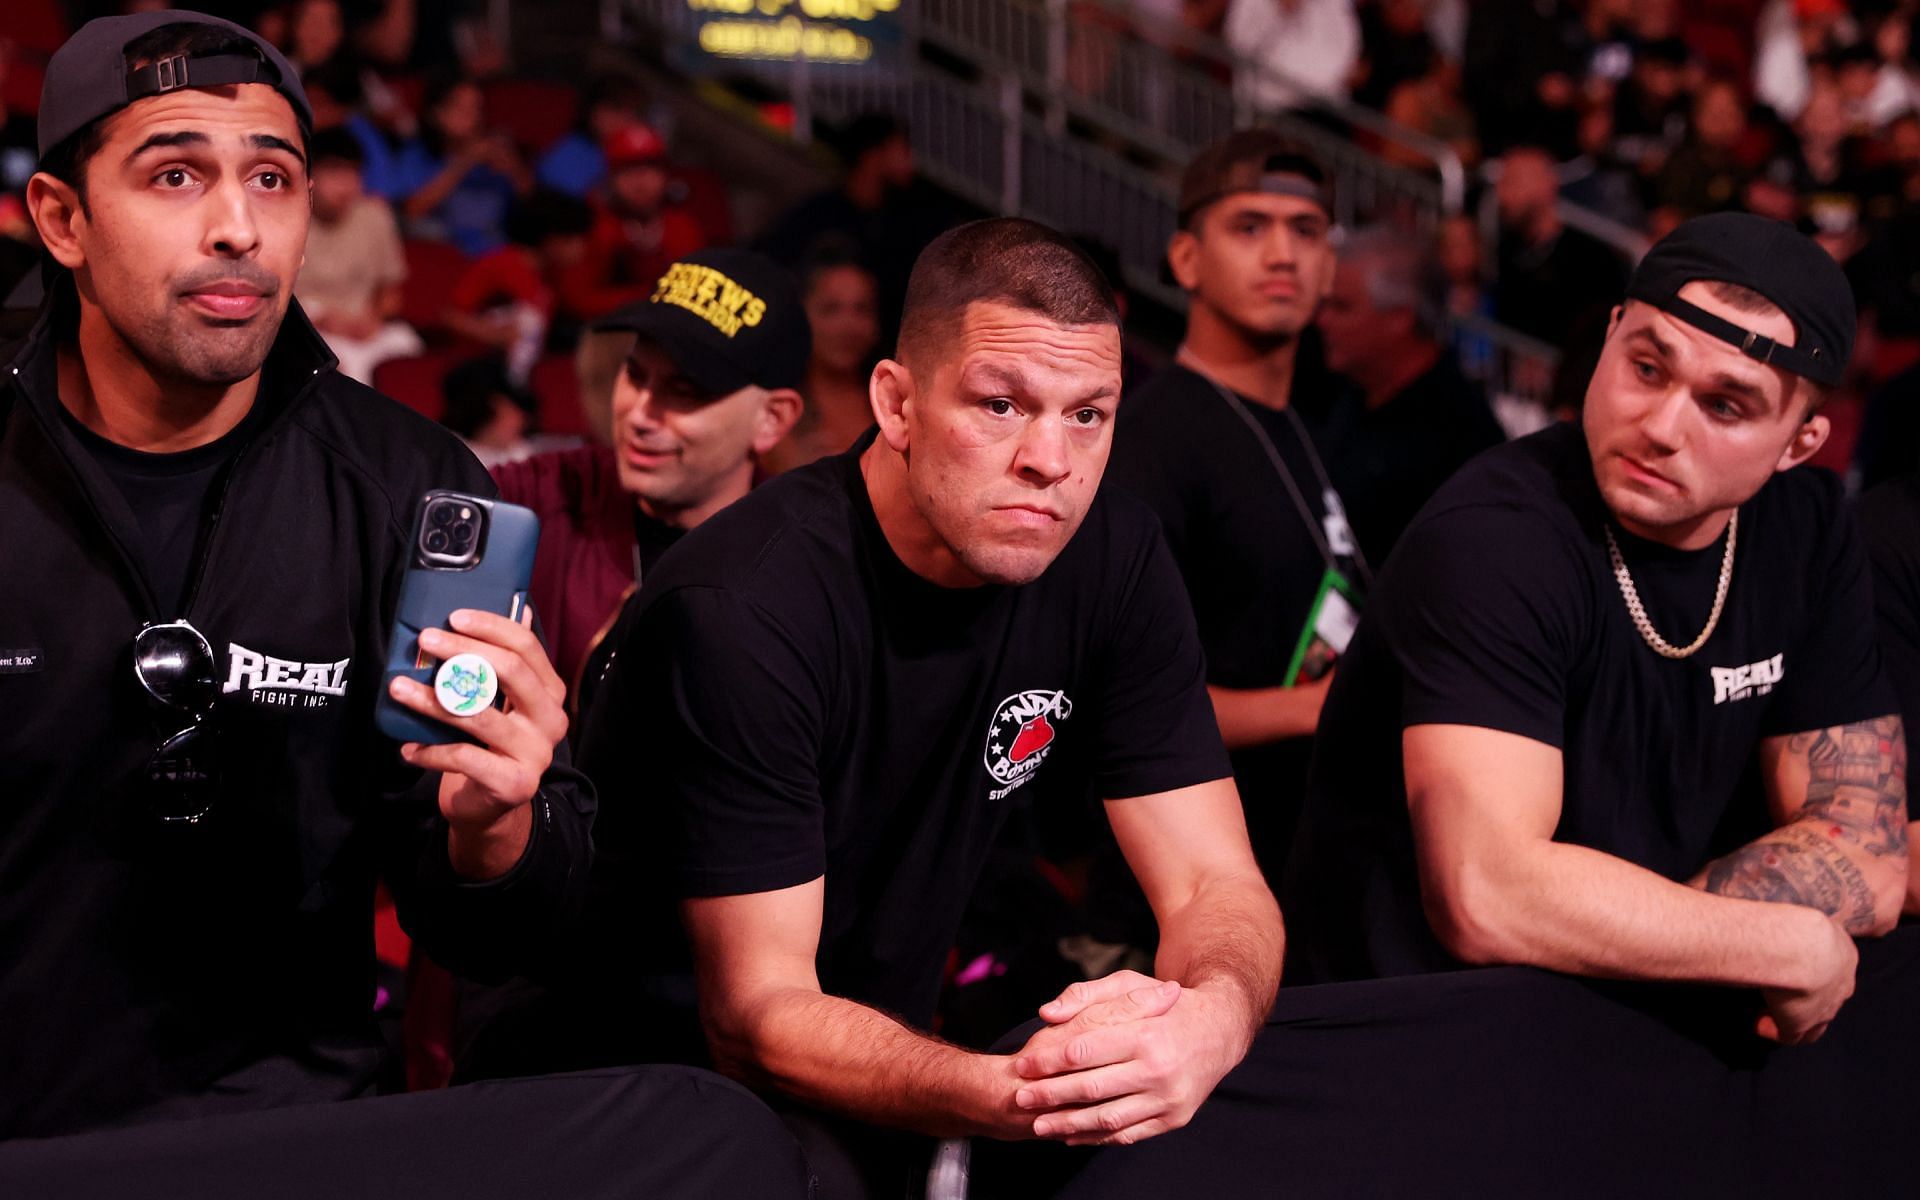 Nate diaz [Image Courtesy: Getty Images]